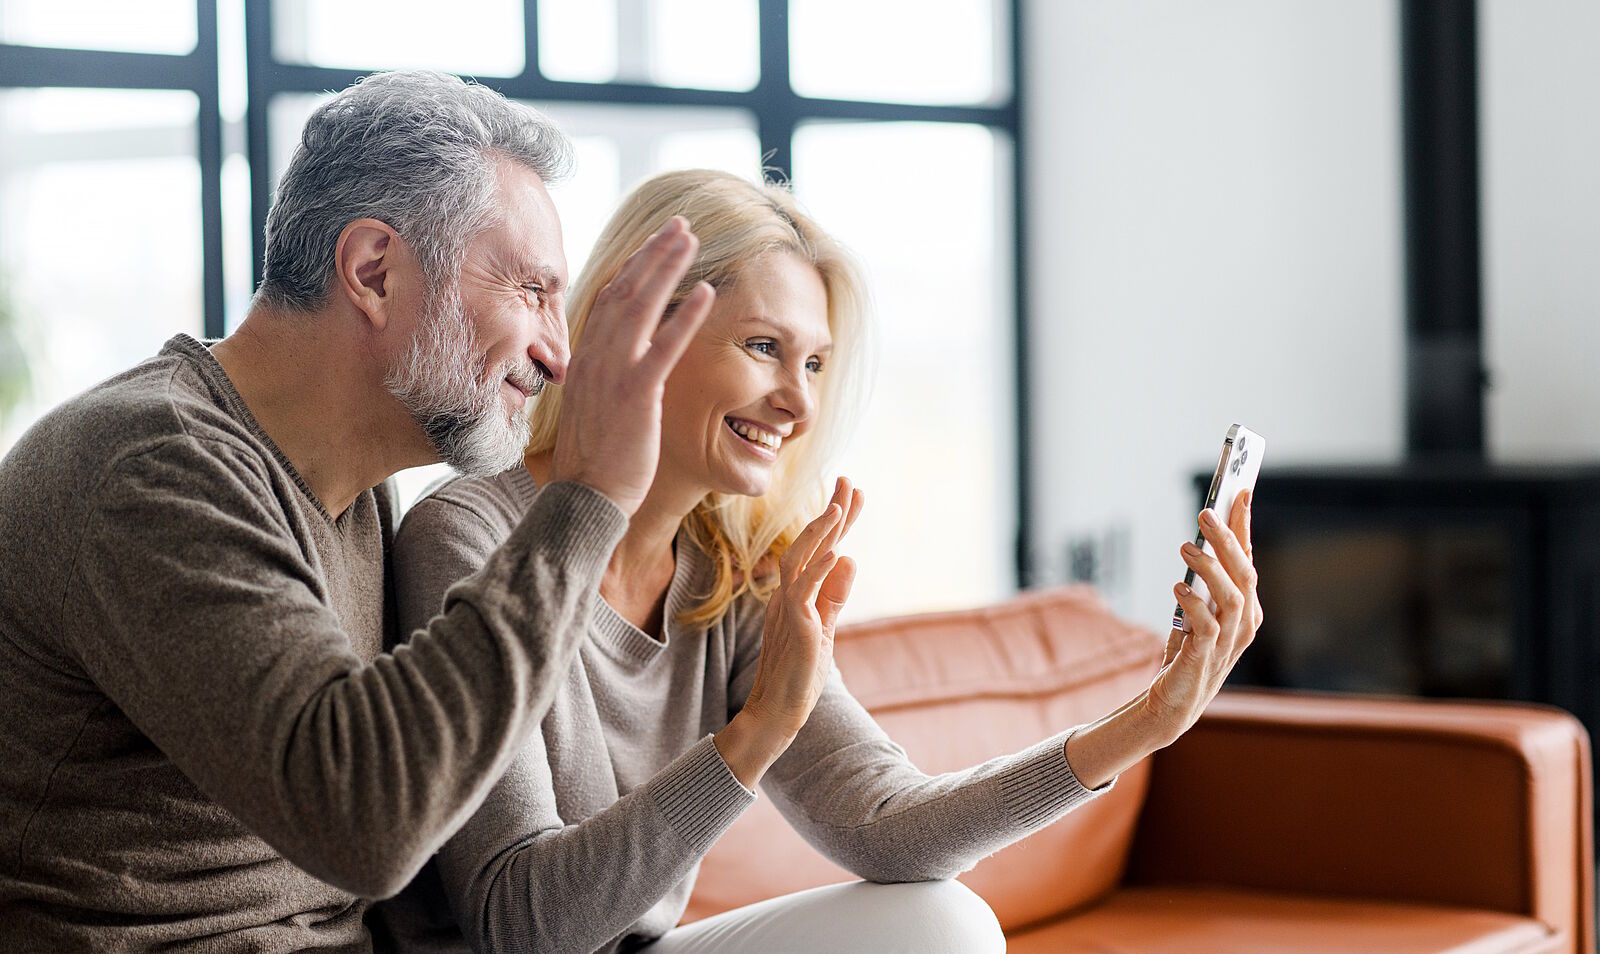 cheerful middle aged couple waving at people on cell phone